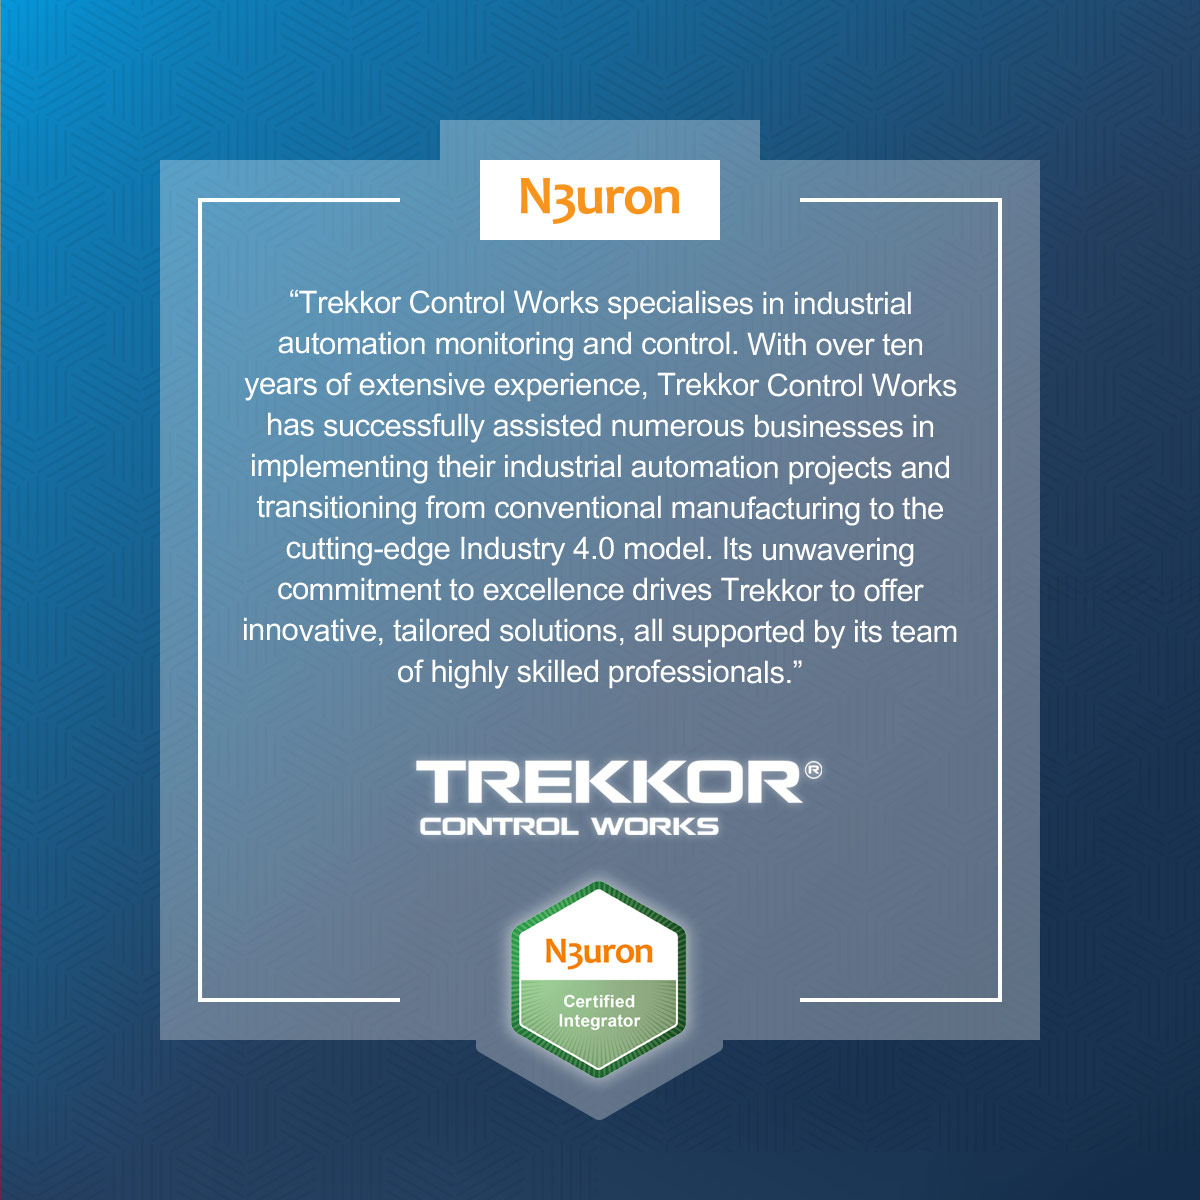 🙌 Introducing Trekkor Control Works, one of our N3AI partners! They provide industrial automation solutions for Green Energy, Oil & Gas, and more. Want to join our N3AI Program too? 👉 Apply here: bit.ly/3L6kVhn

#N3AI #Trekkor #IIoT #Industry40 #industrialIoT #N3uron